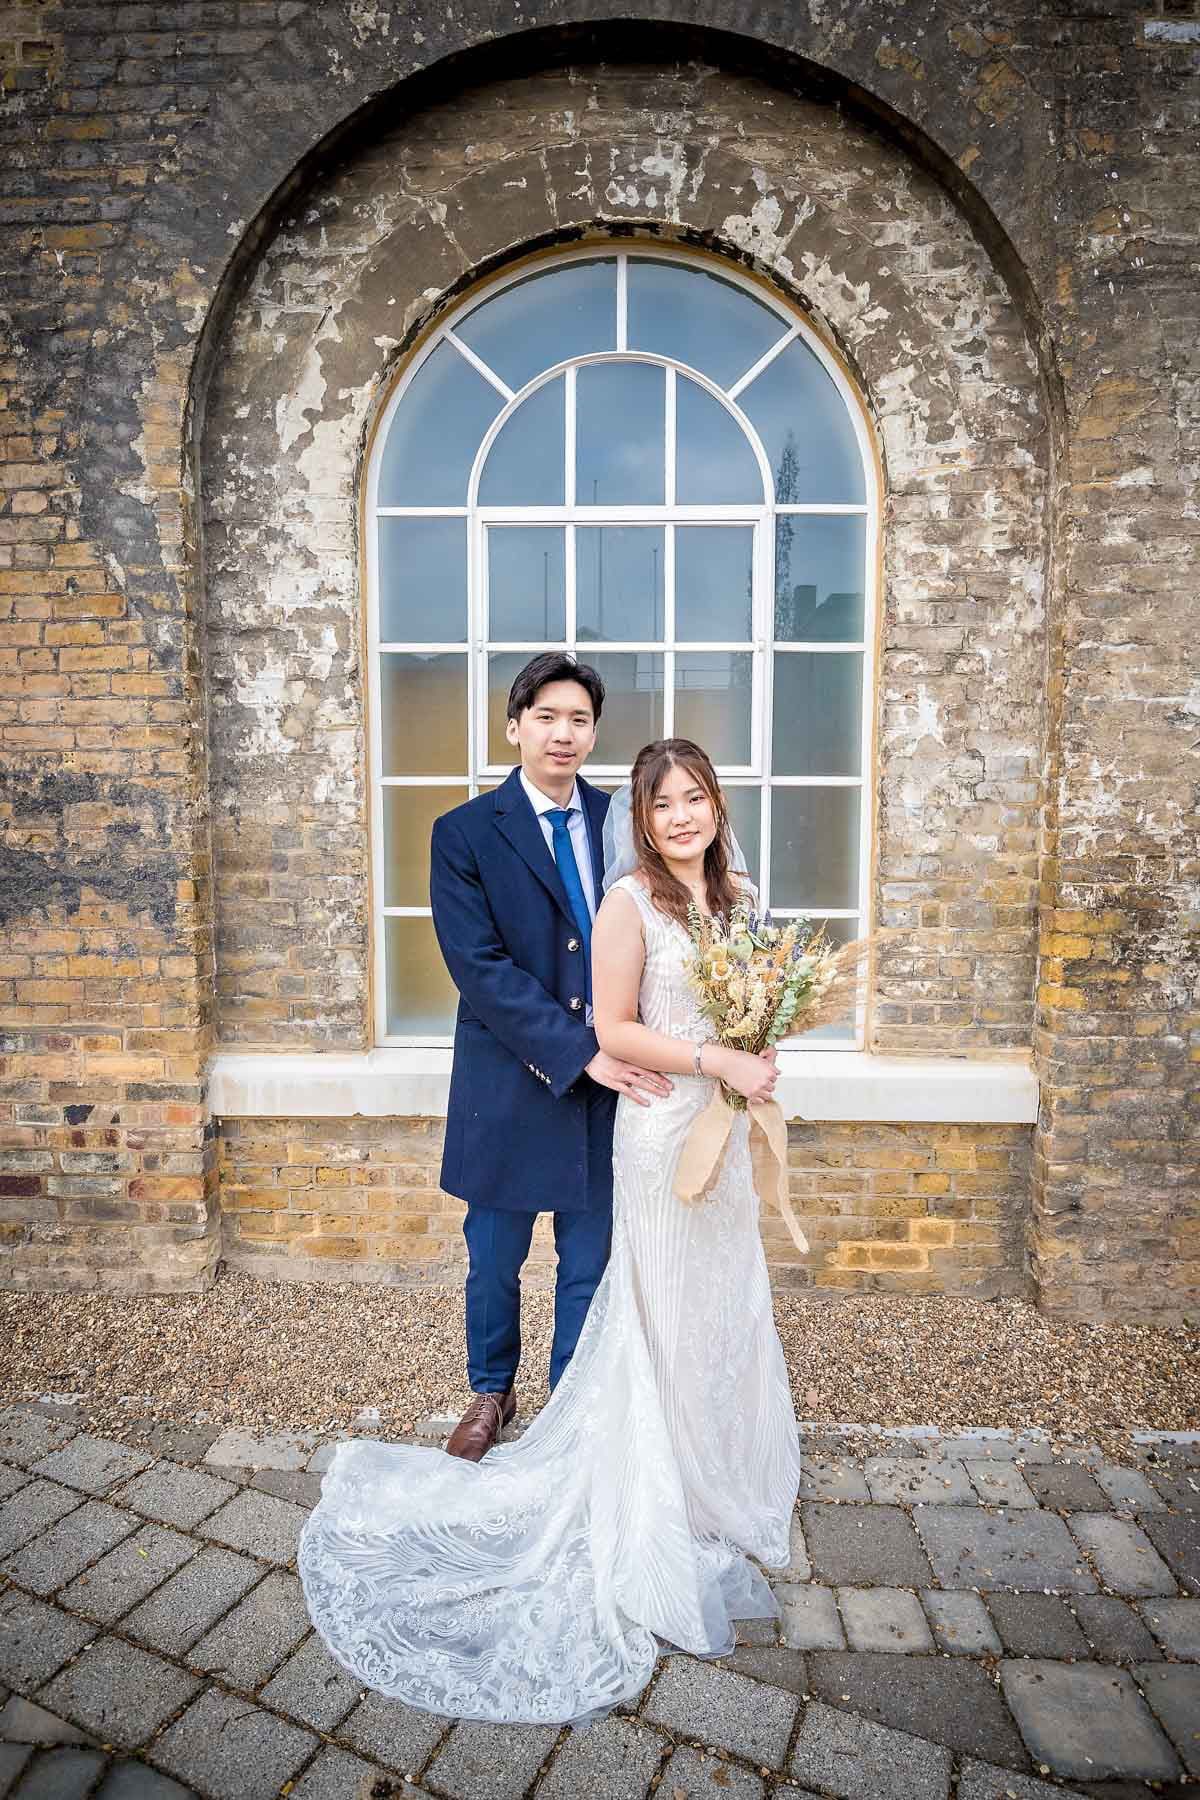 A wedding couple pose outside an arched window with flaky paintwork in Woolwich